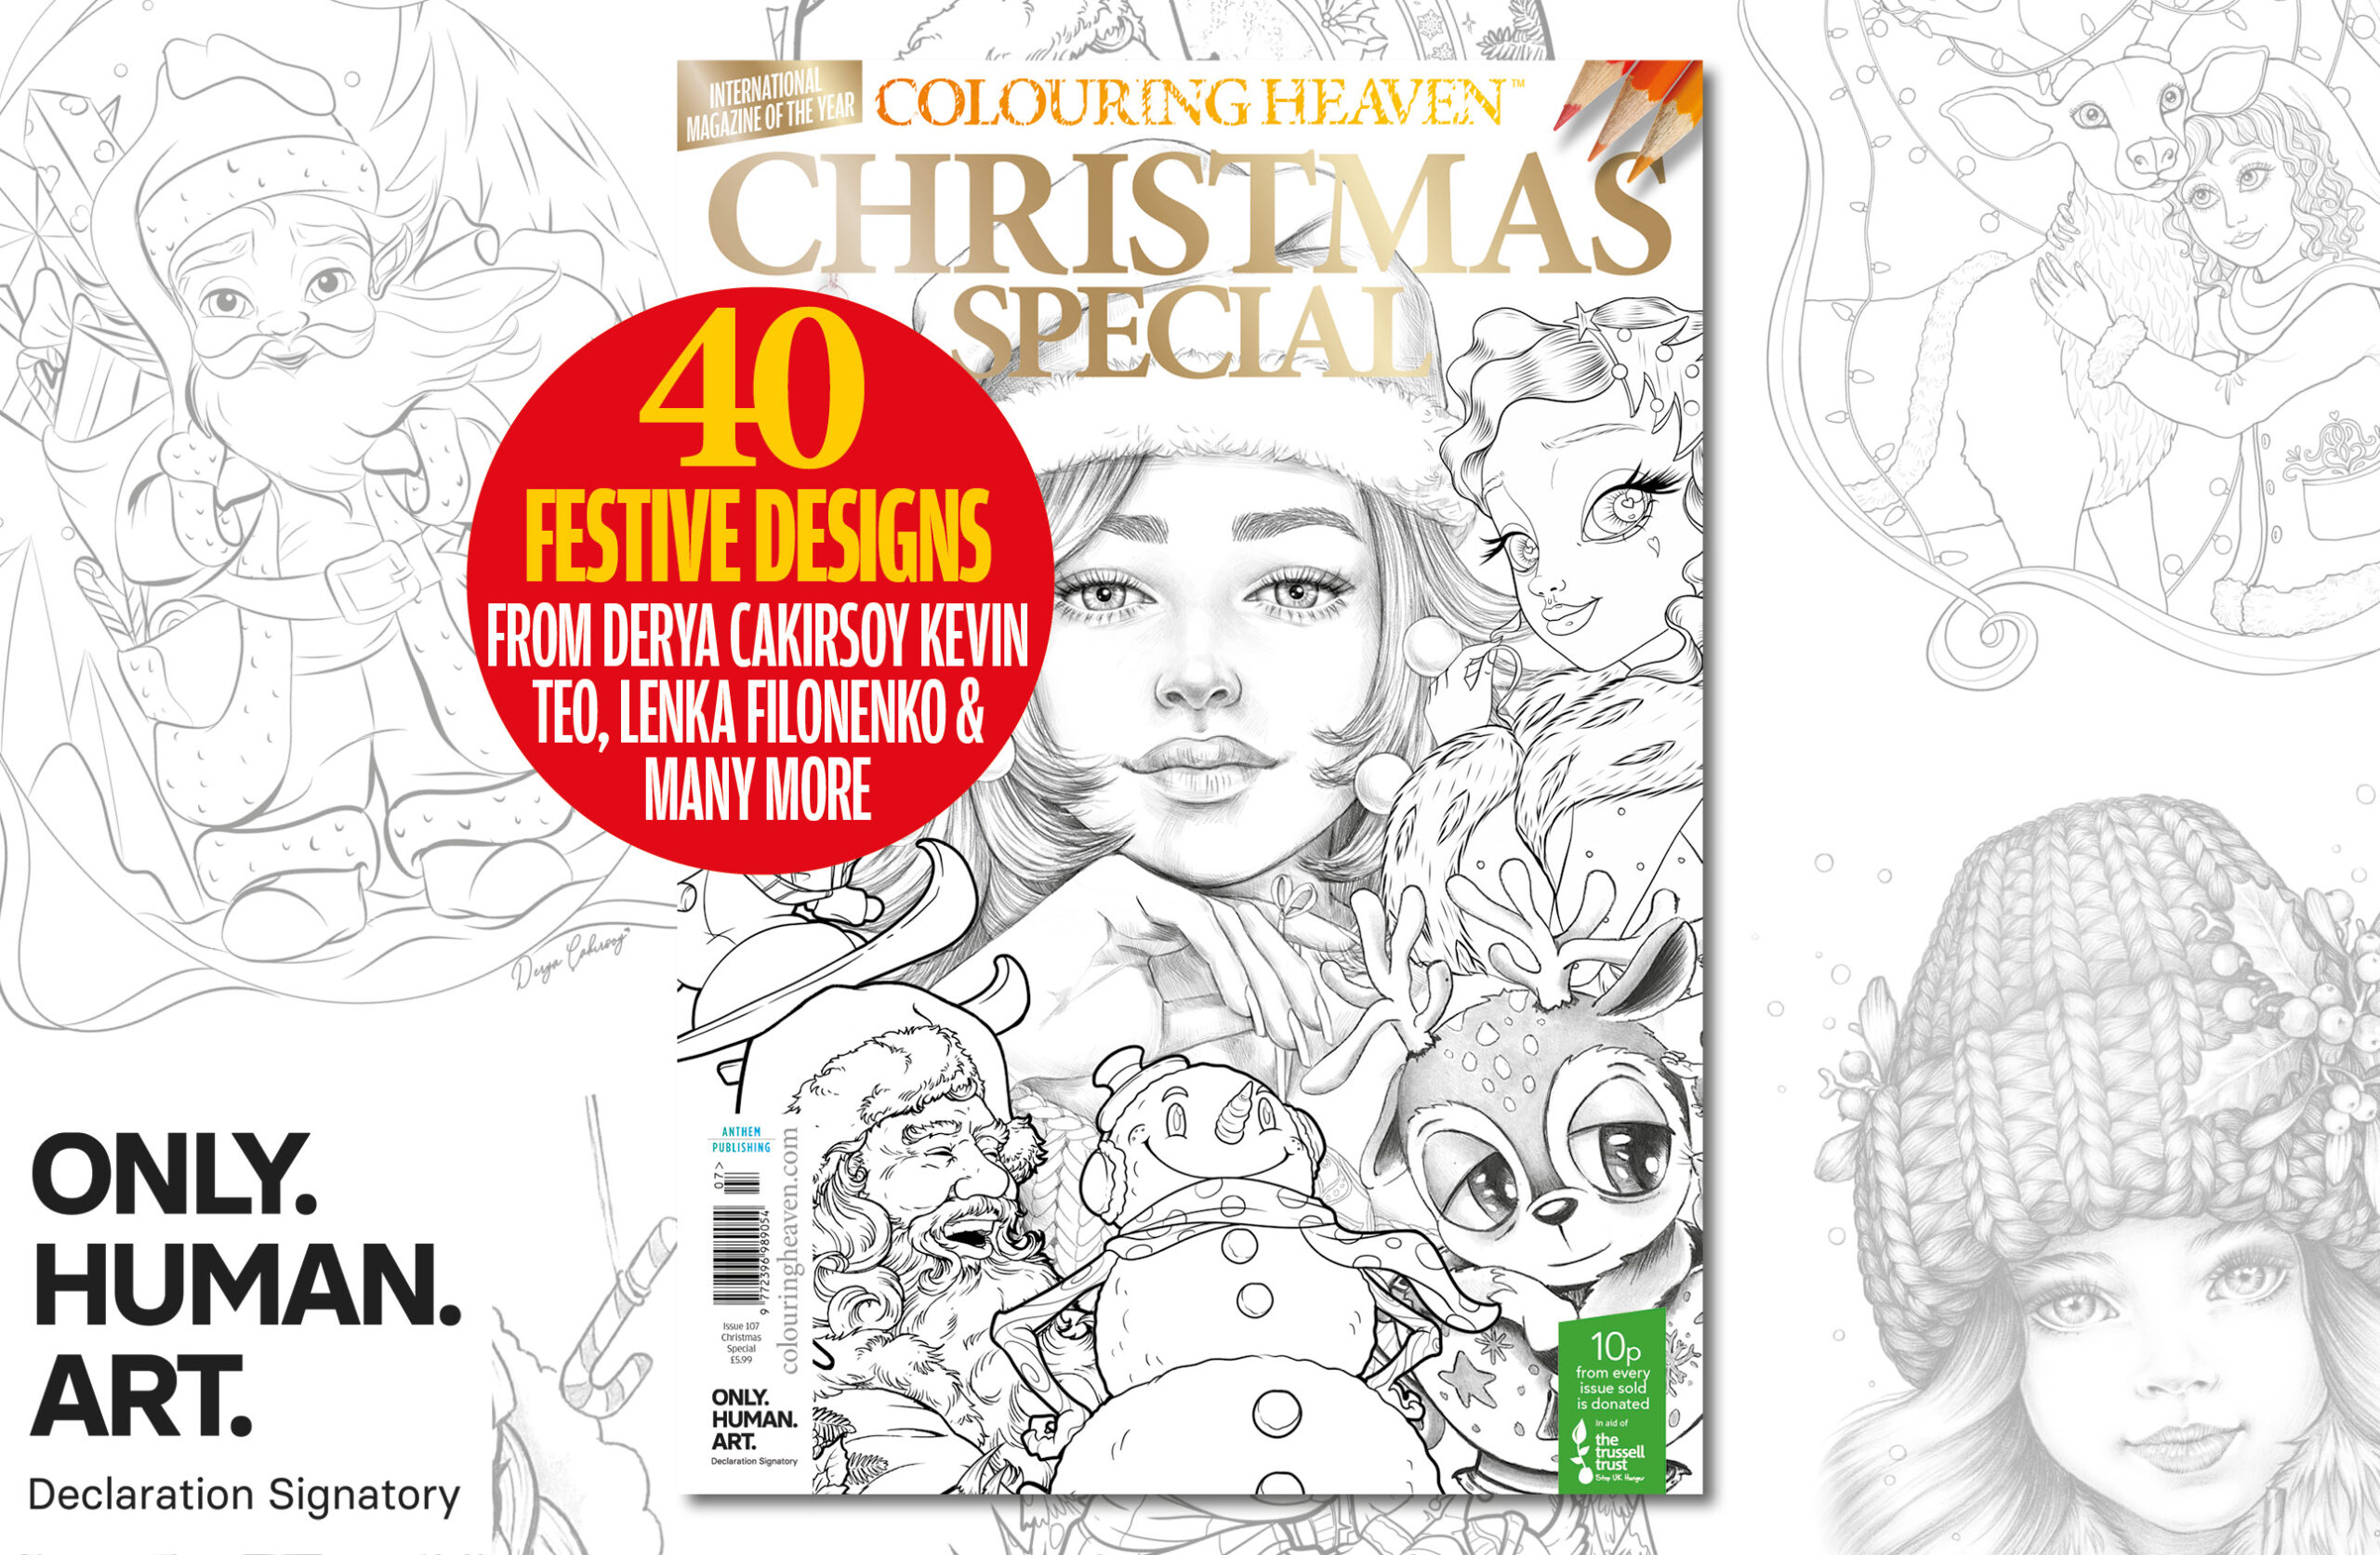 New issue colouring heaven christmas special colouring heaven